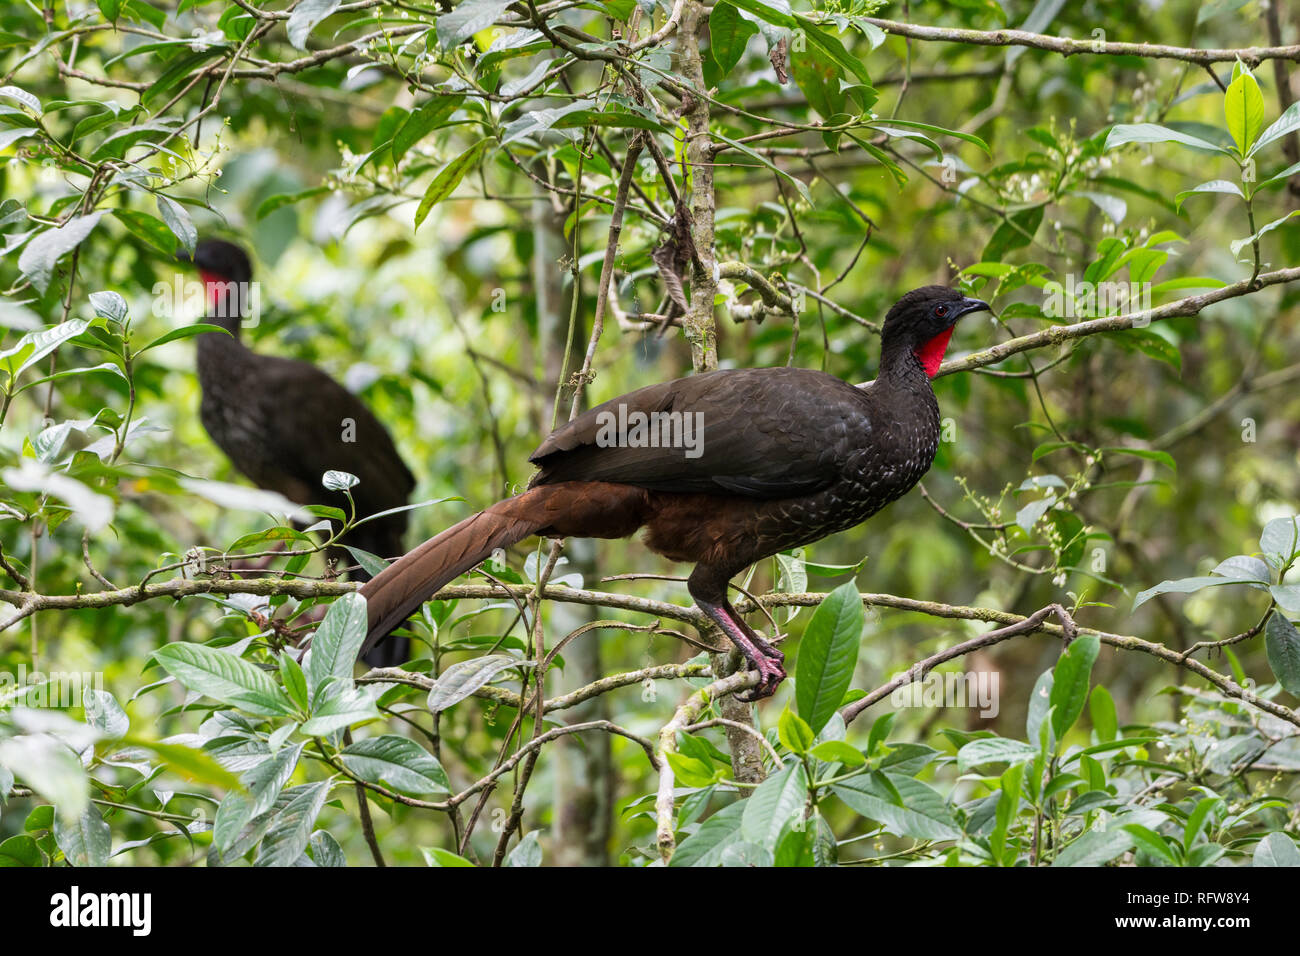 A pair of Crested Guans (Penelope purpurascens) in tropical forest. Costa Rica, Central America. Stock Photo